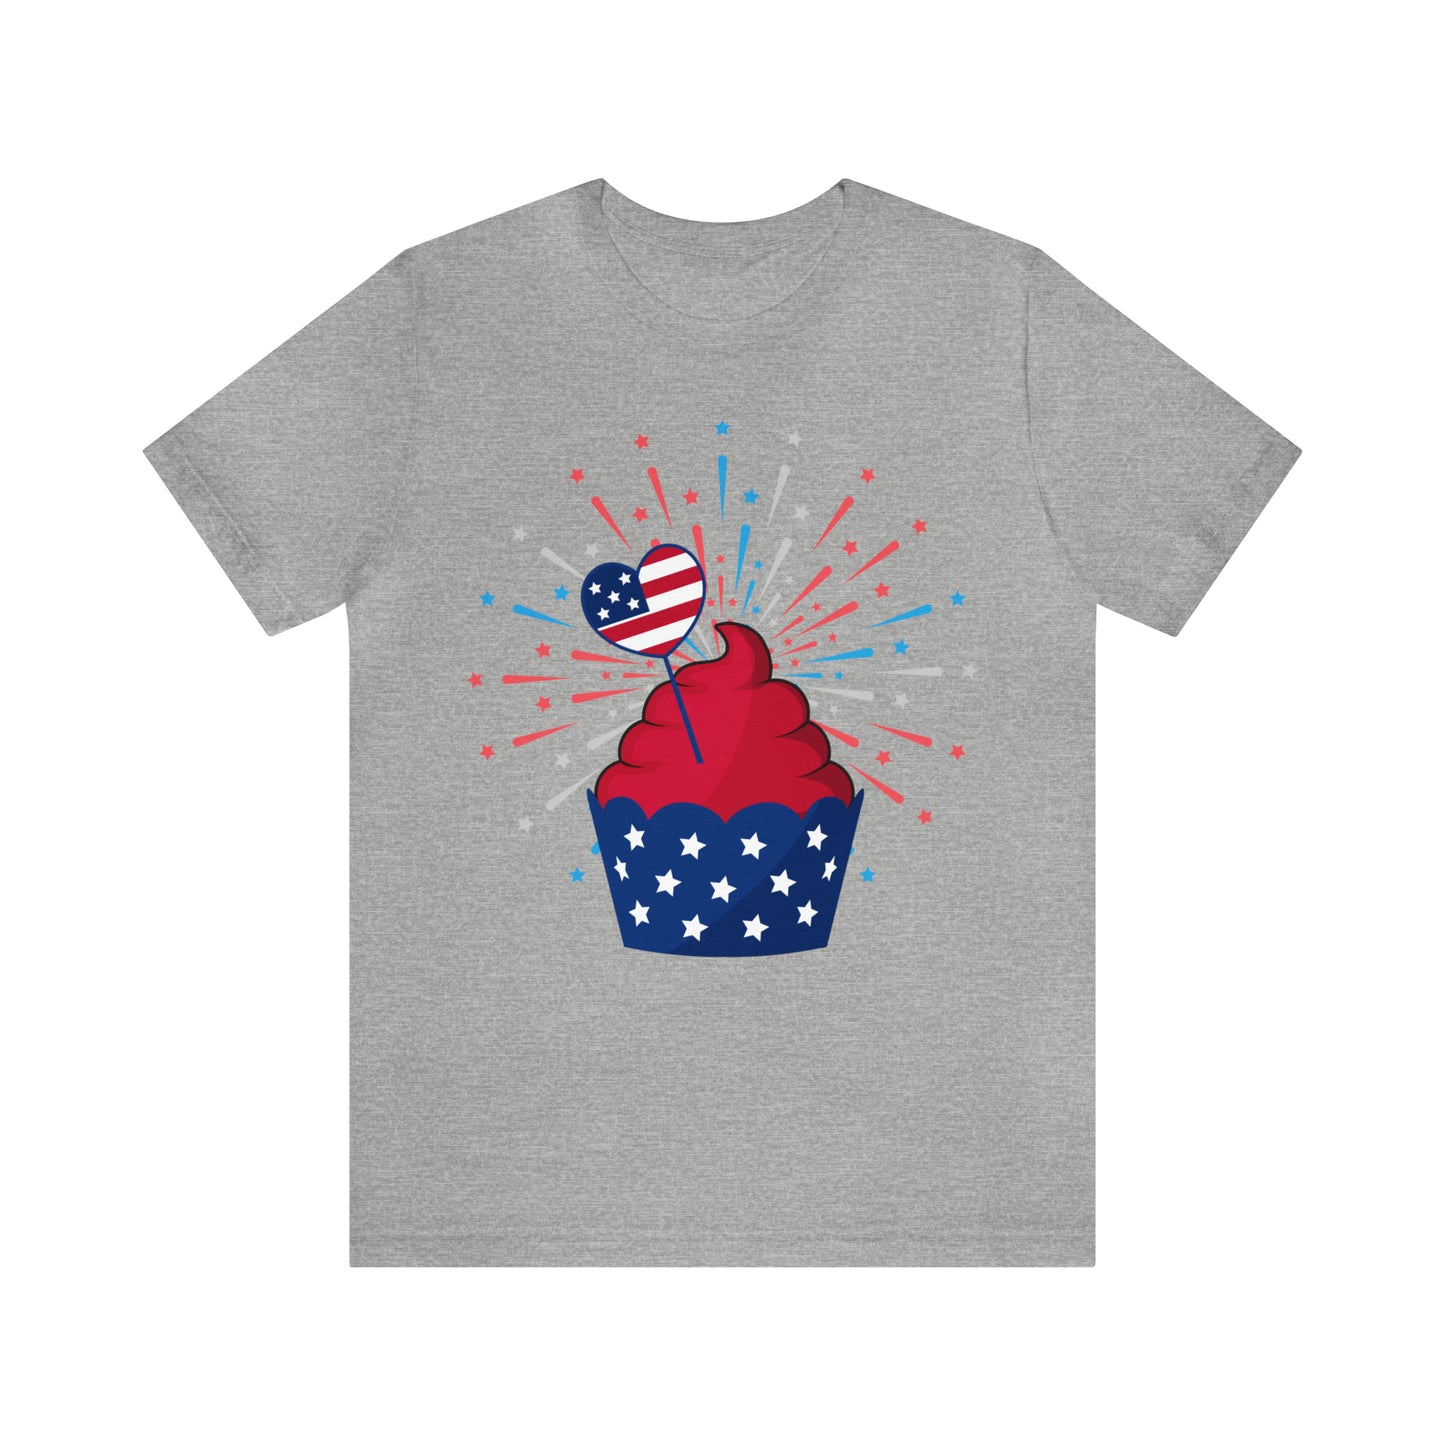 Patriotic American USA Celebration Cup Cake Graphic On Short Sleeve Cotton Unisex T-shirt Fourth of July Father's Day Veterans